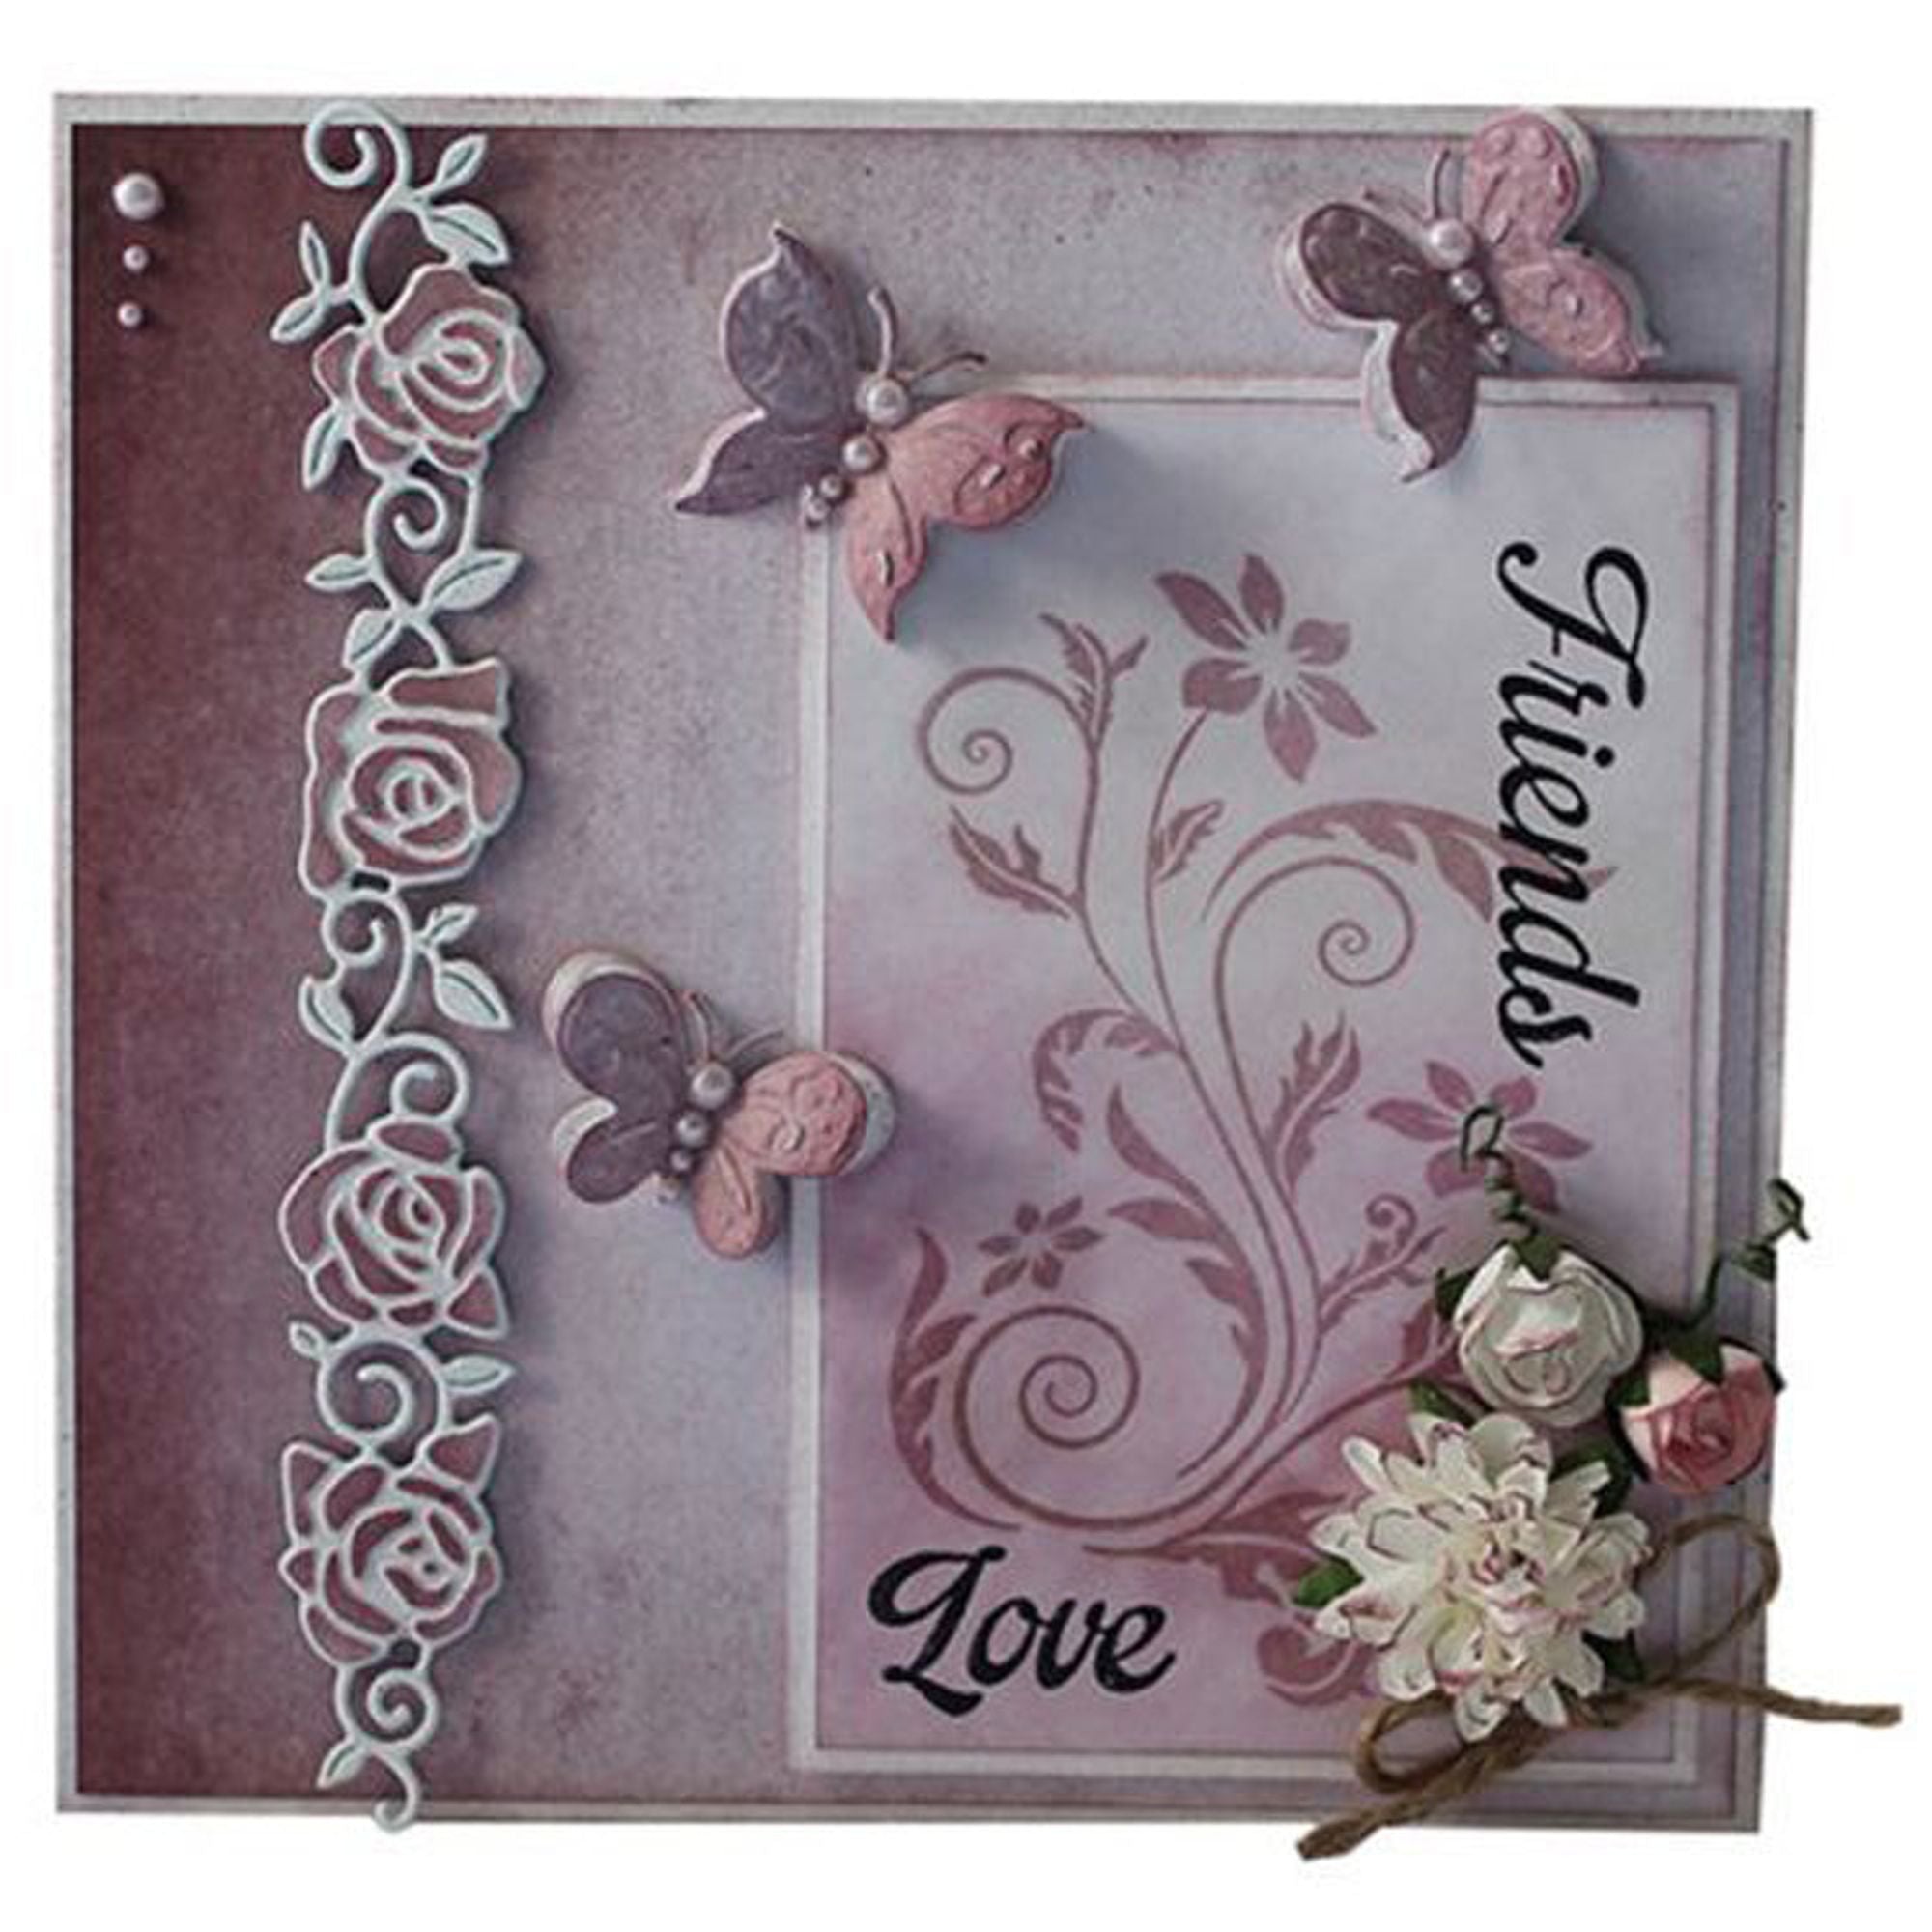 Joy! Crafts Cutting and Embossing die - Rose Border